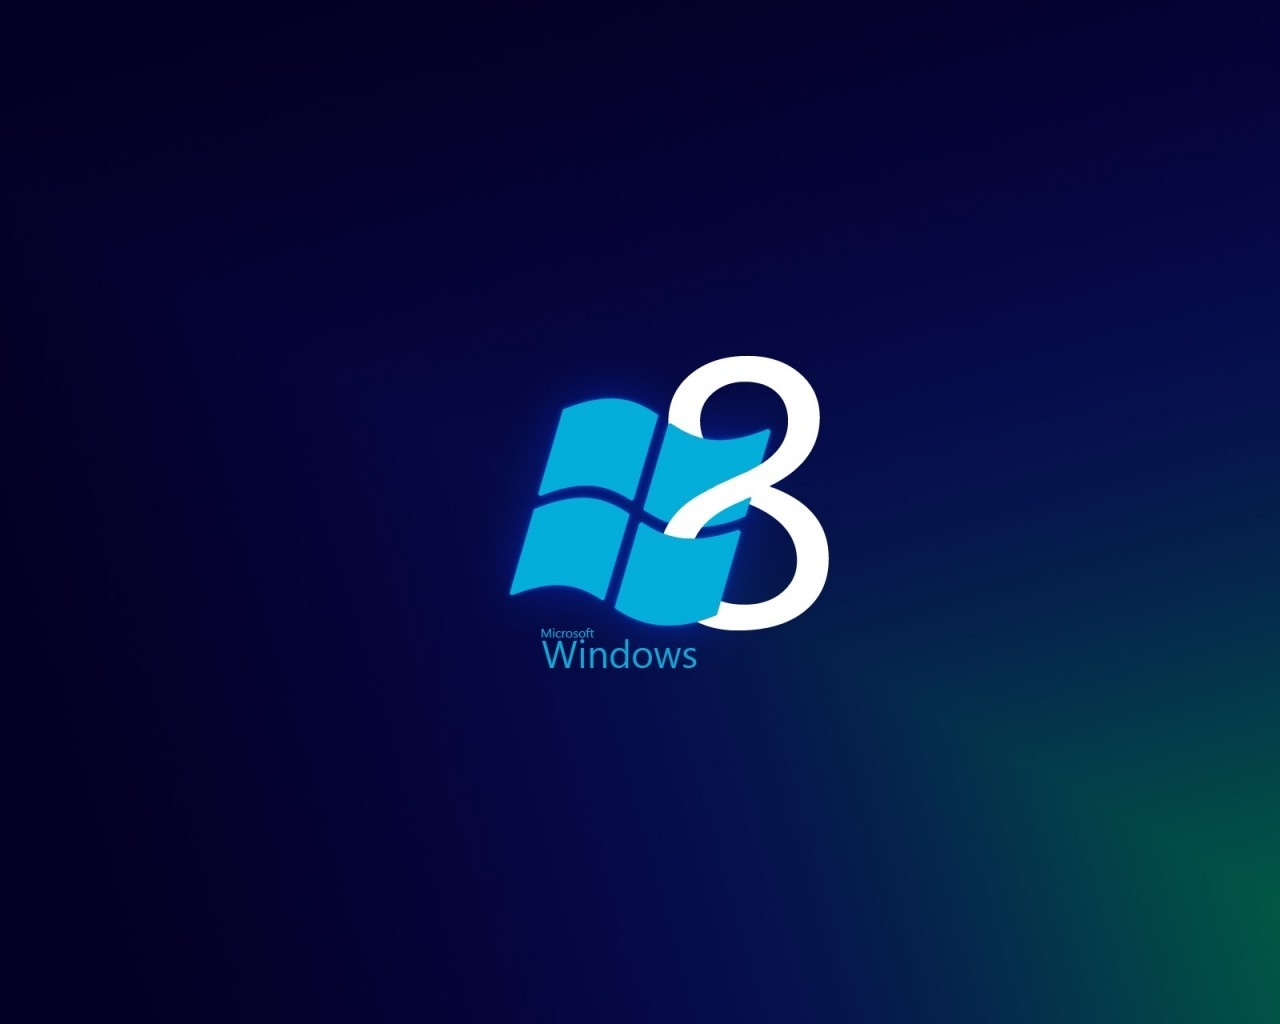 Windows 8 Blue Style for 1280 x 1024 resolution